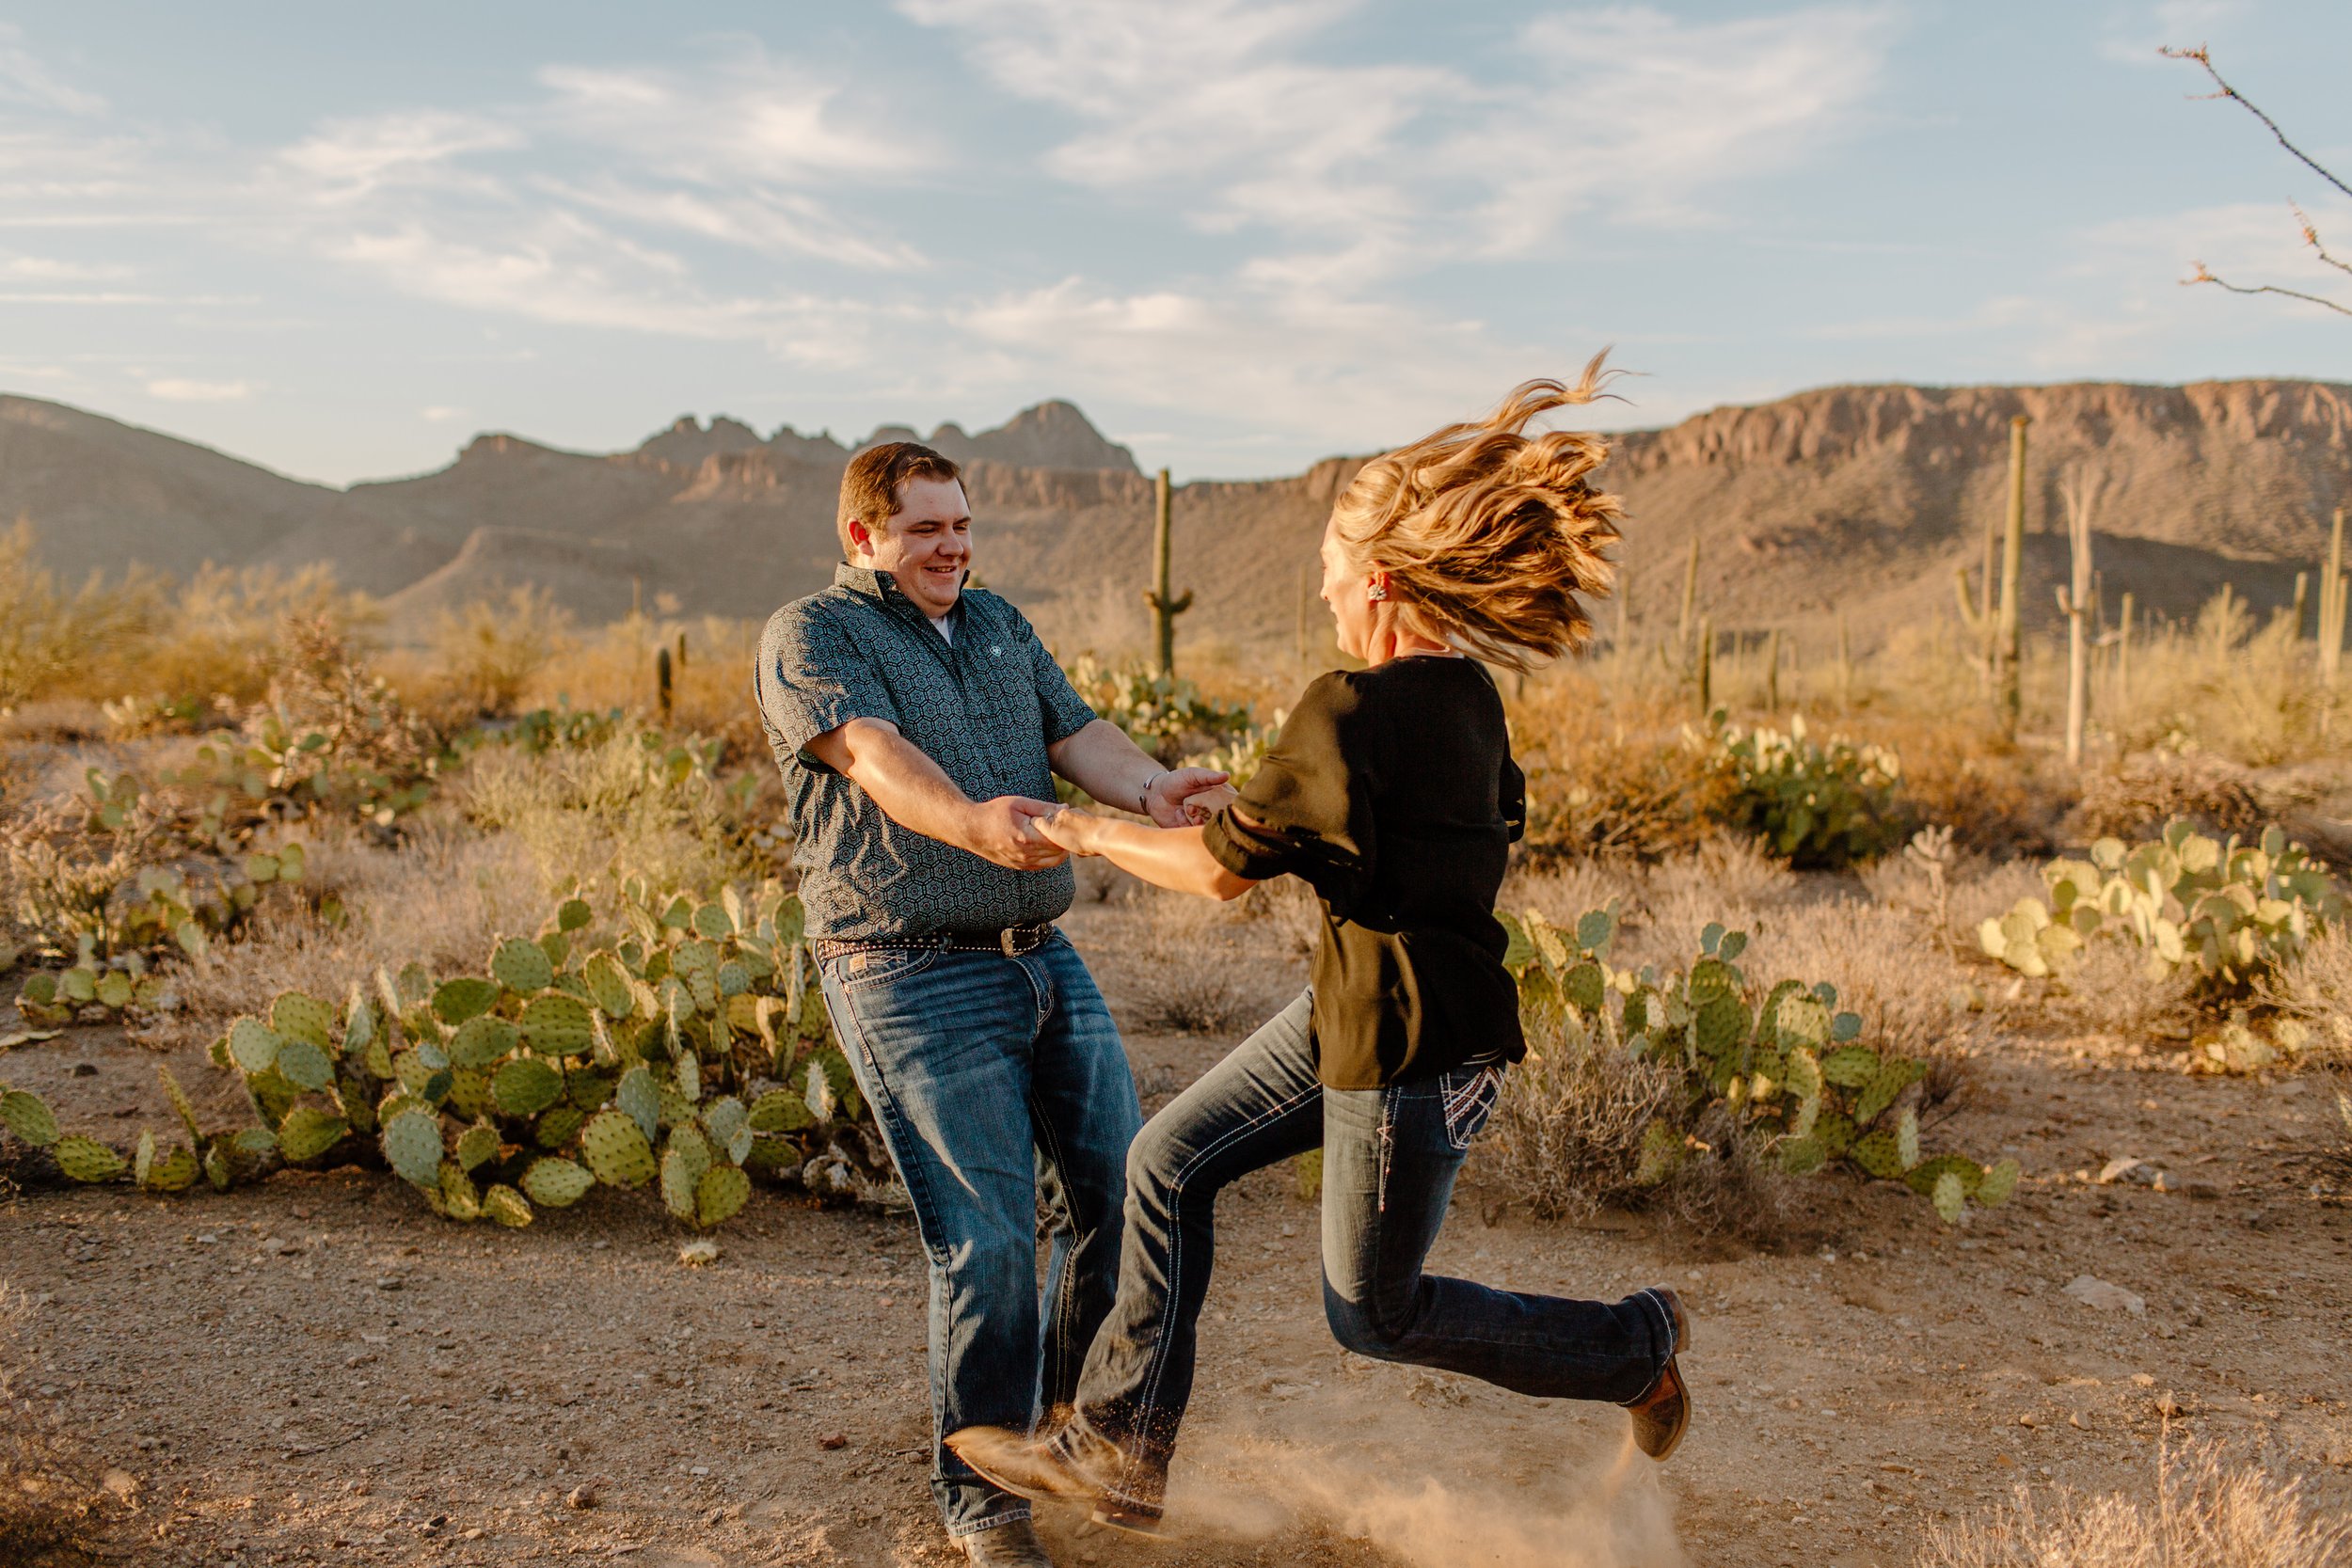  Couple spinning around happily and wildly in Saguaro National Park in Tucson Arizona 